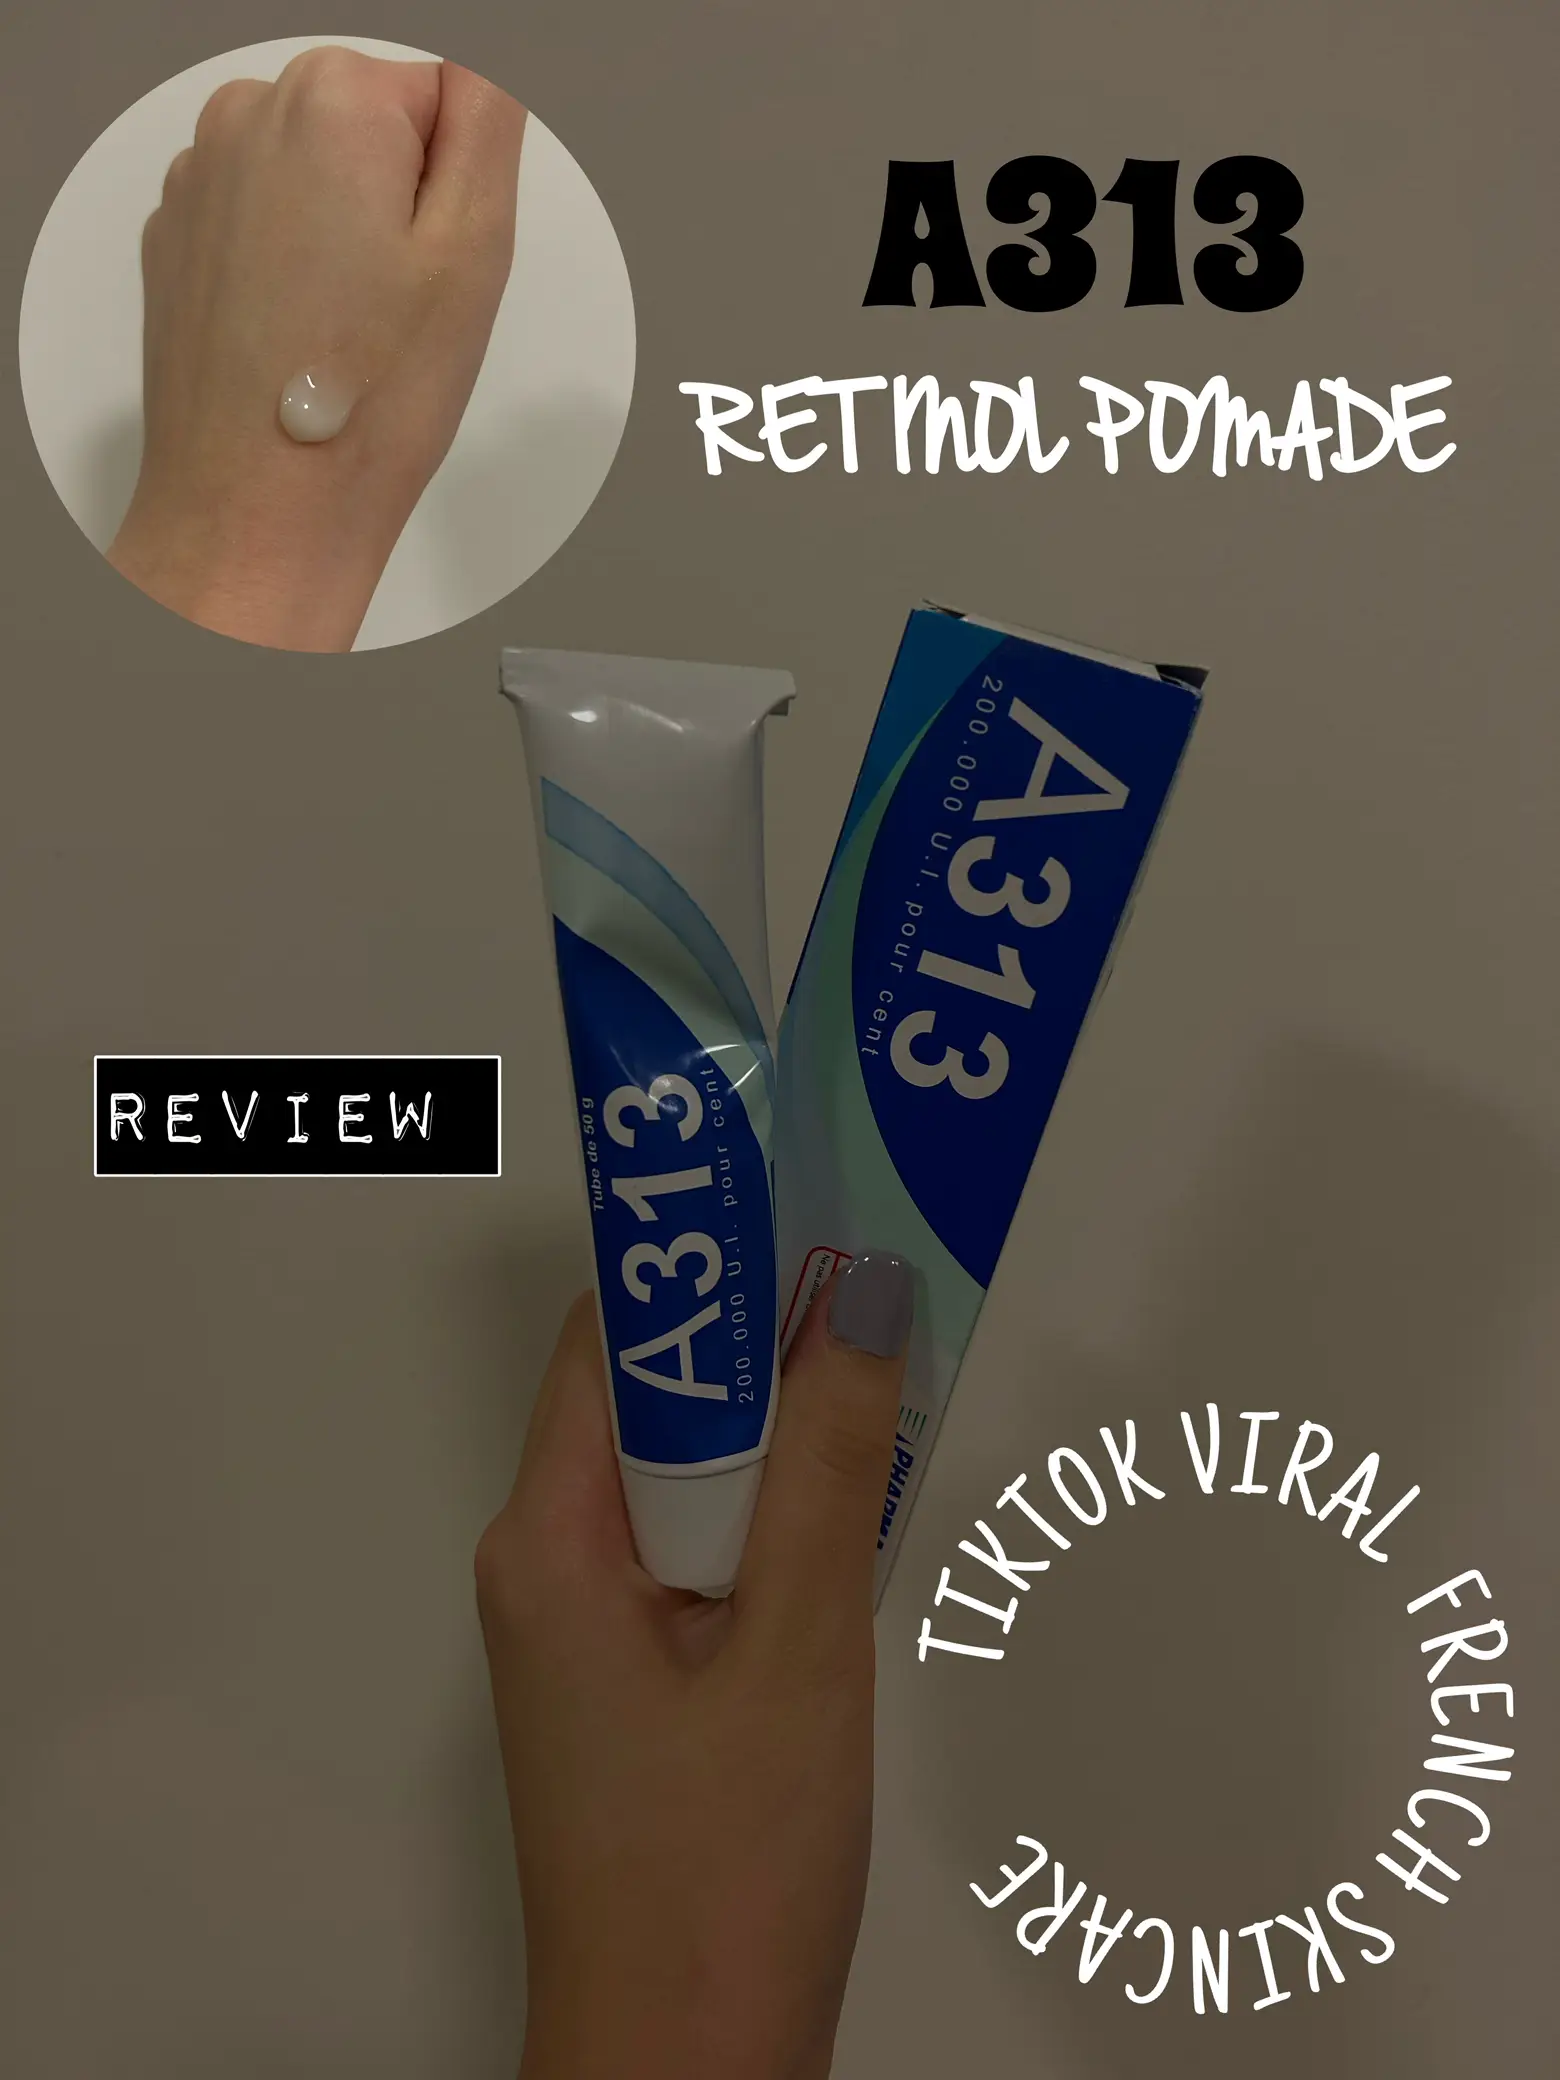 How To Use: Tiktok Viral A313 Retinol Pomade | Gallery Posted By Bblancivyy  | Lemon8